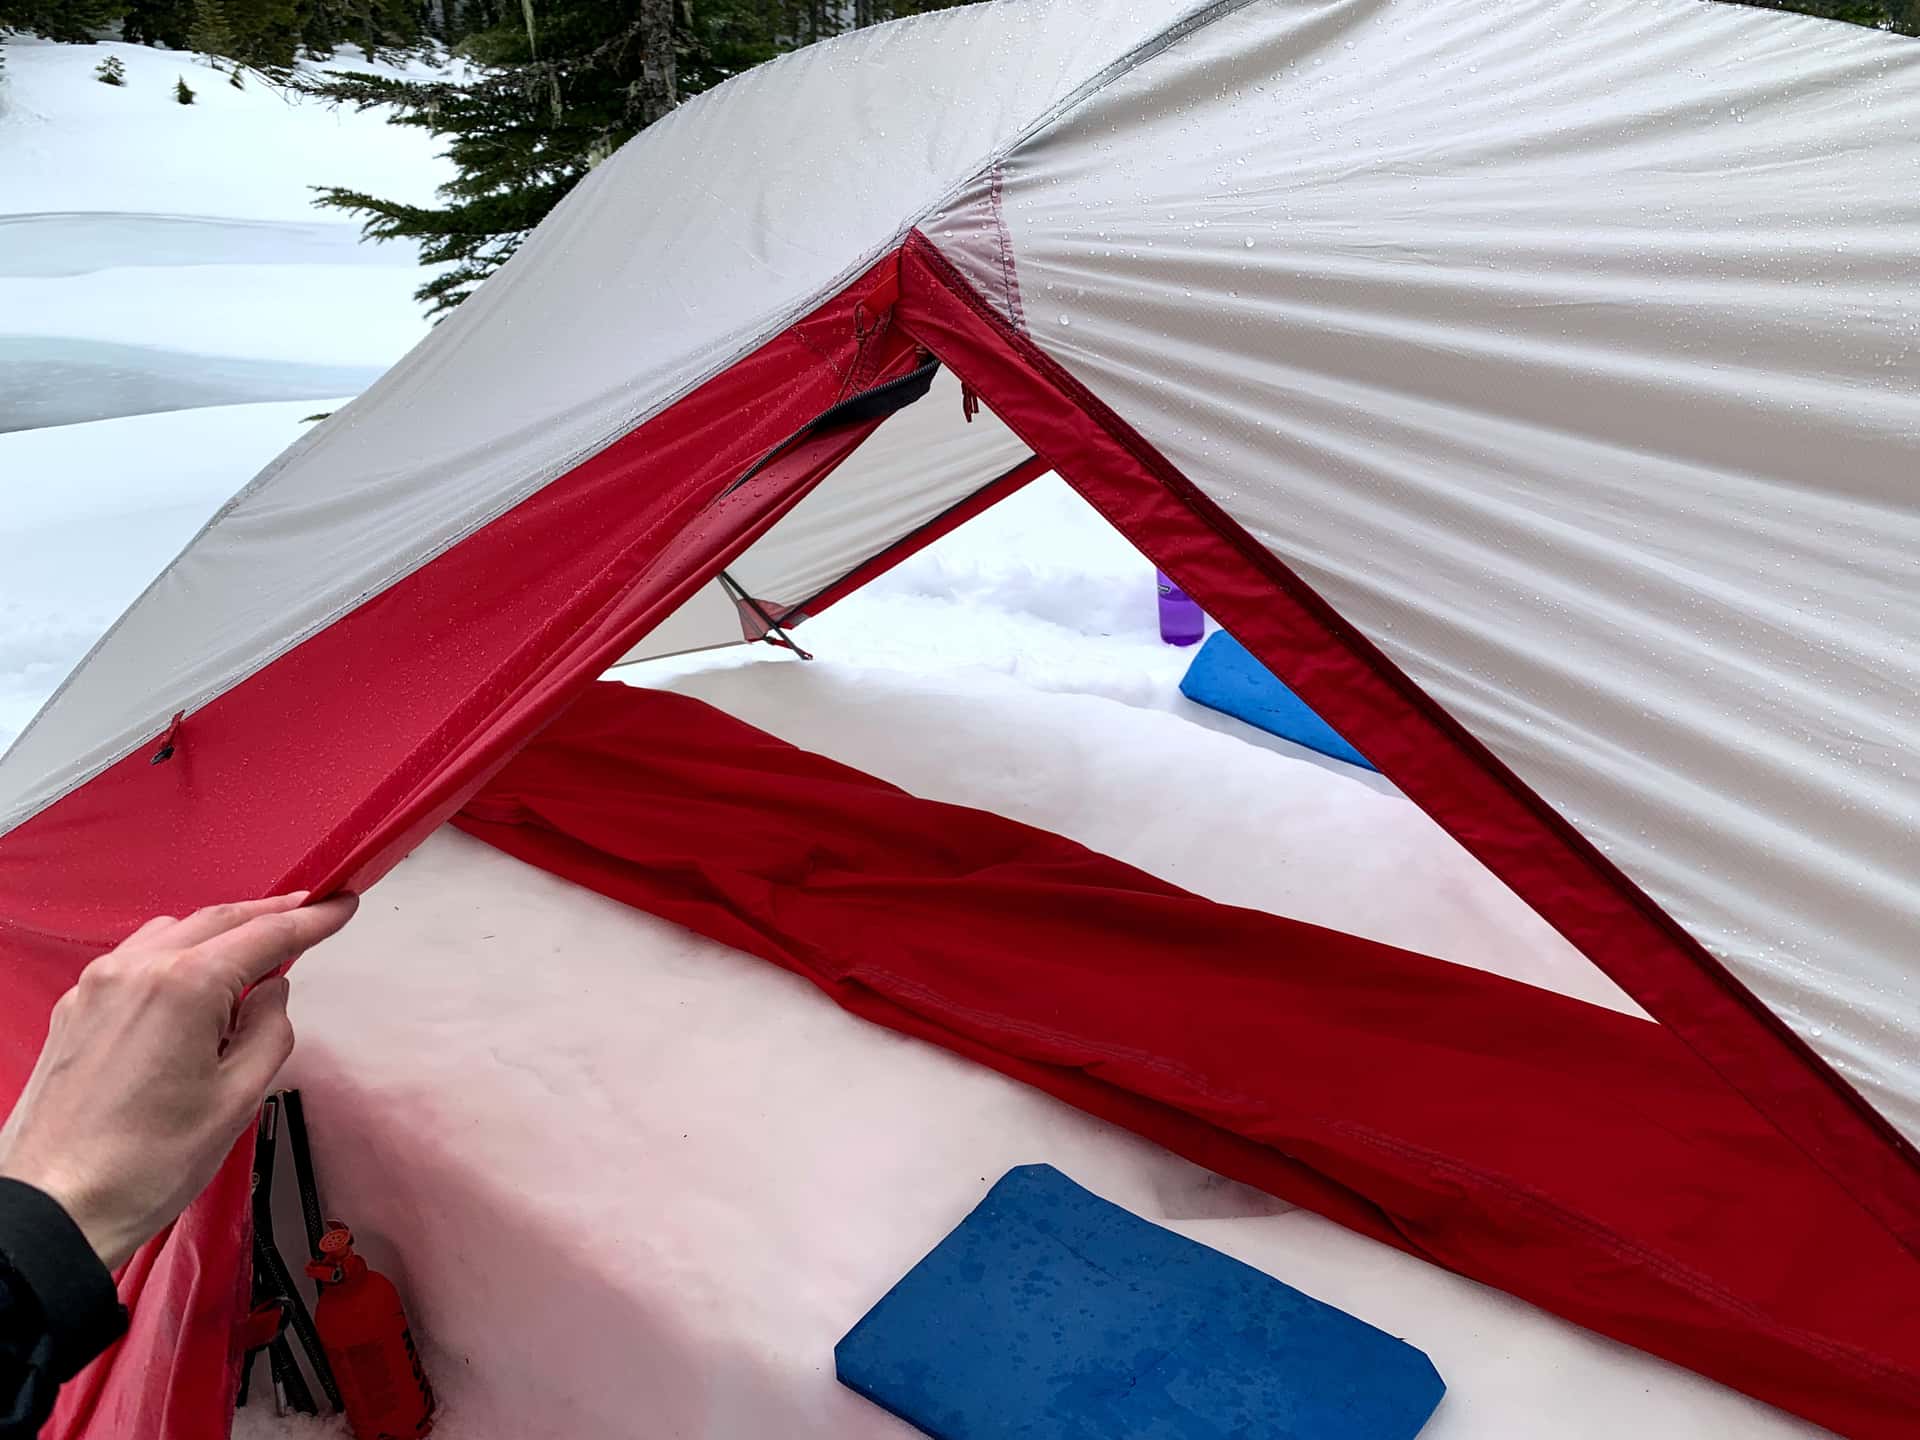 folding a tent body under cover of the erect fly in the rain